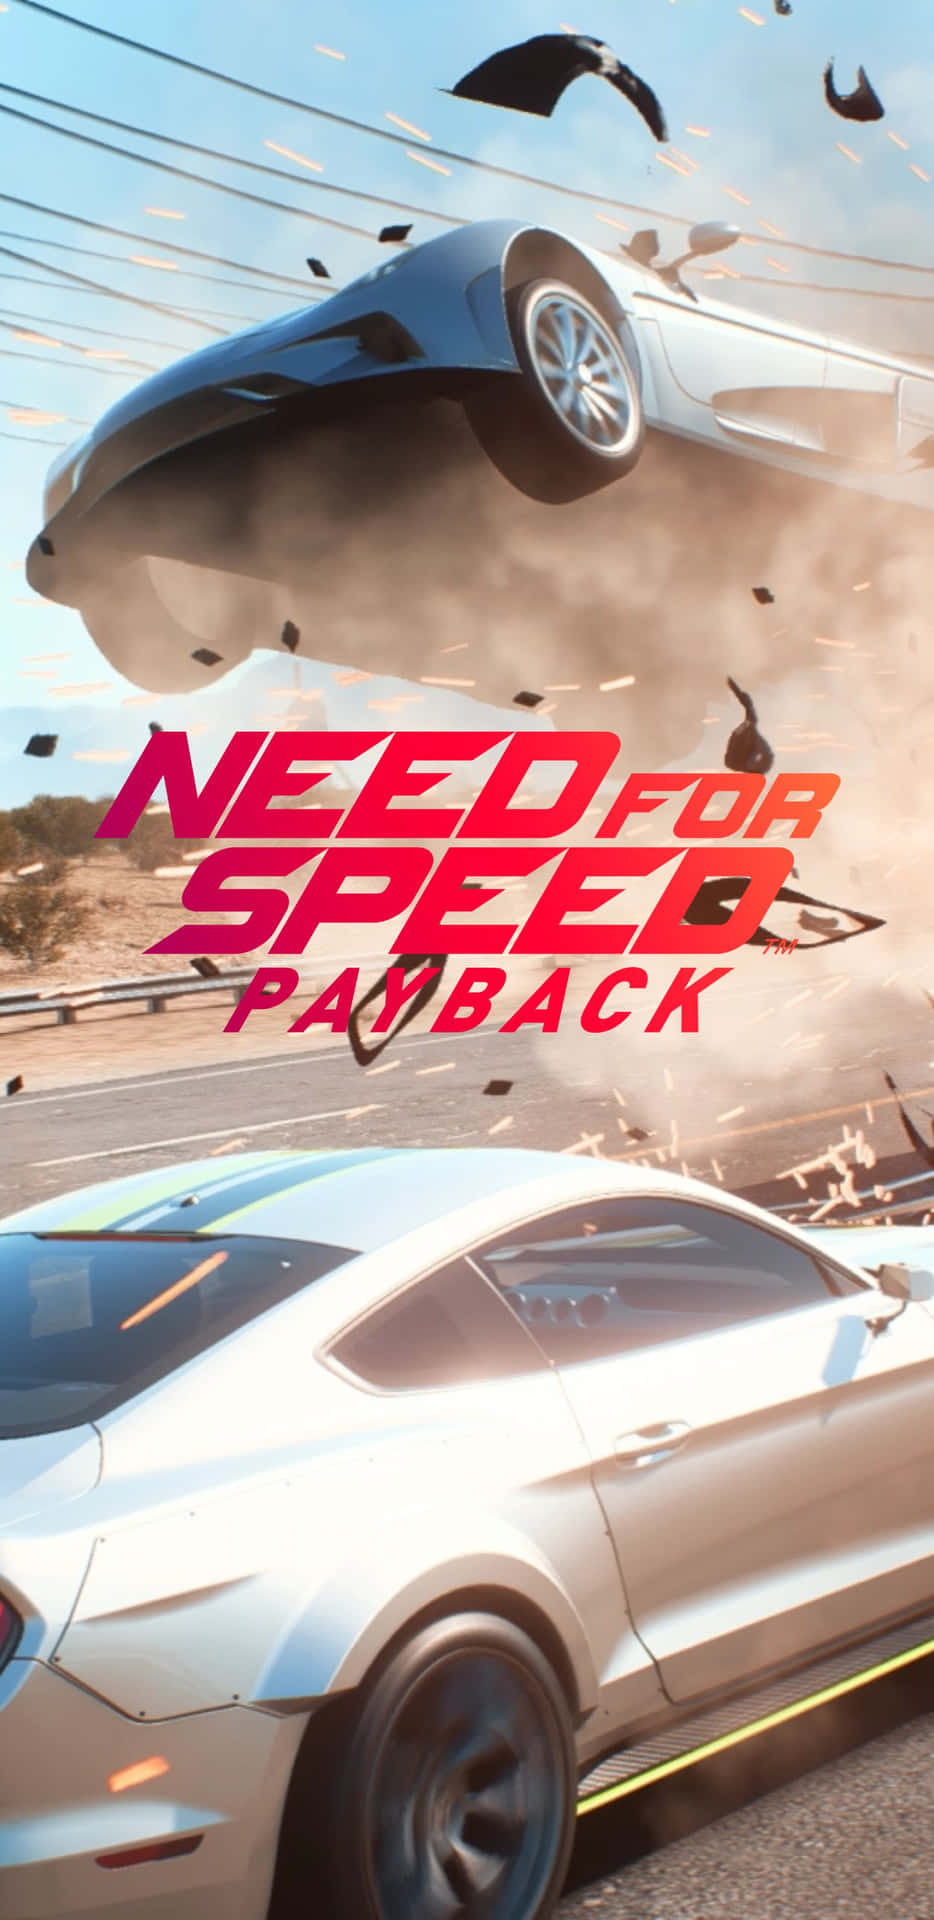 Enjoy the thrills and spills of Need for Speed Payback on your Pixel 3 XL